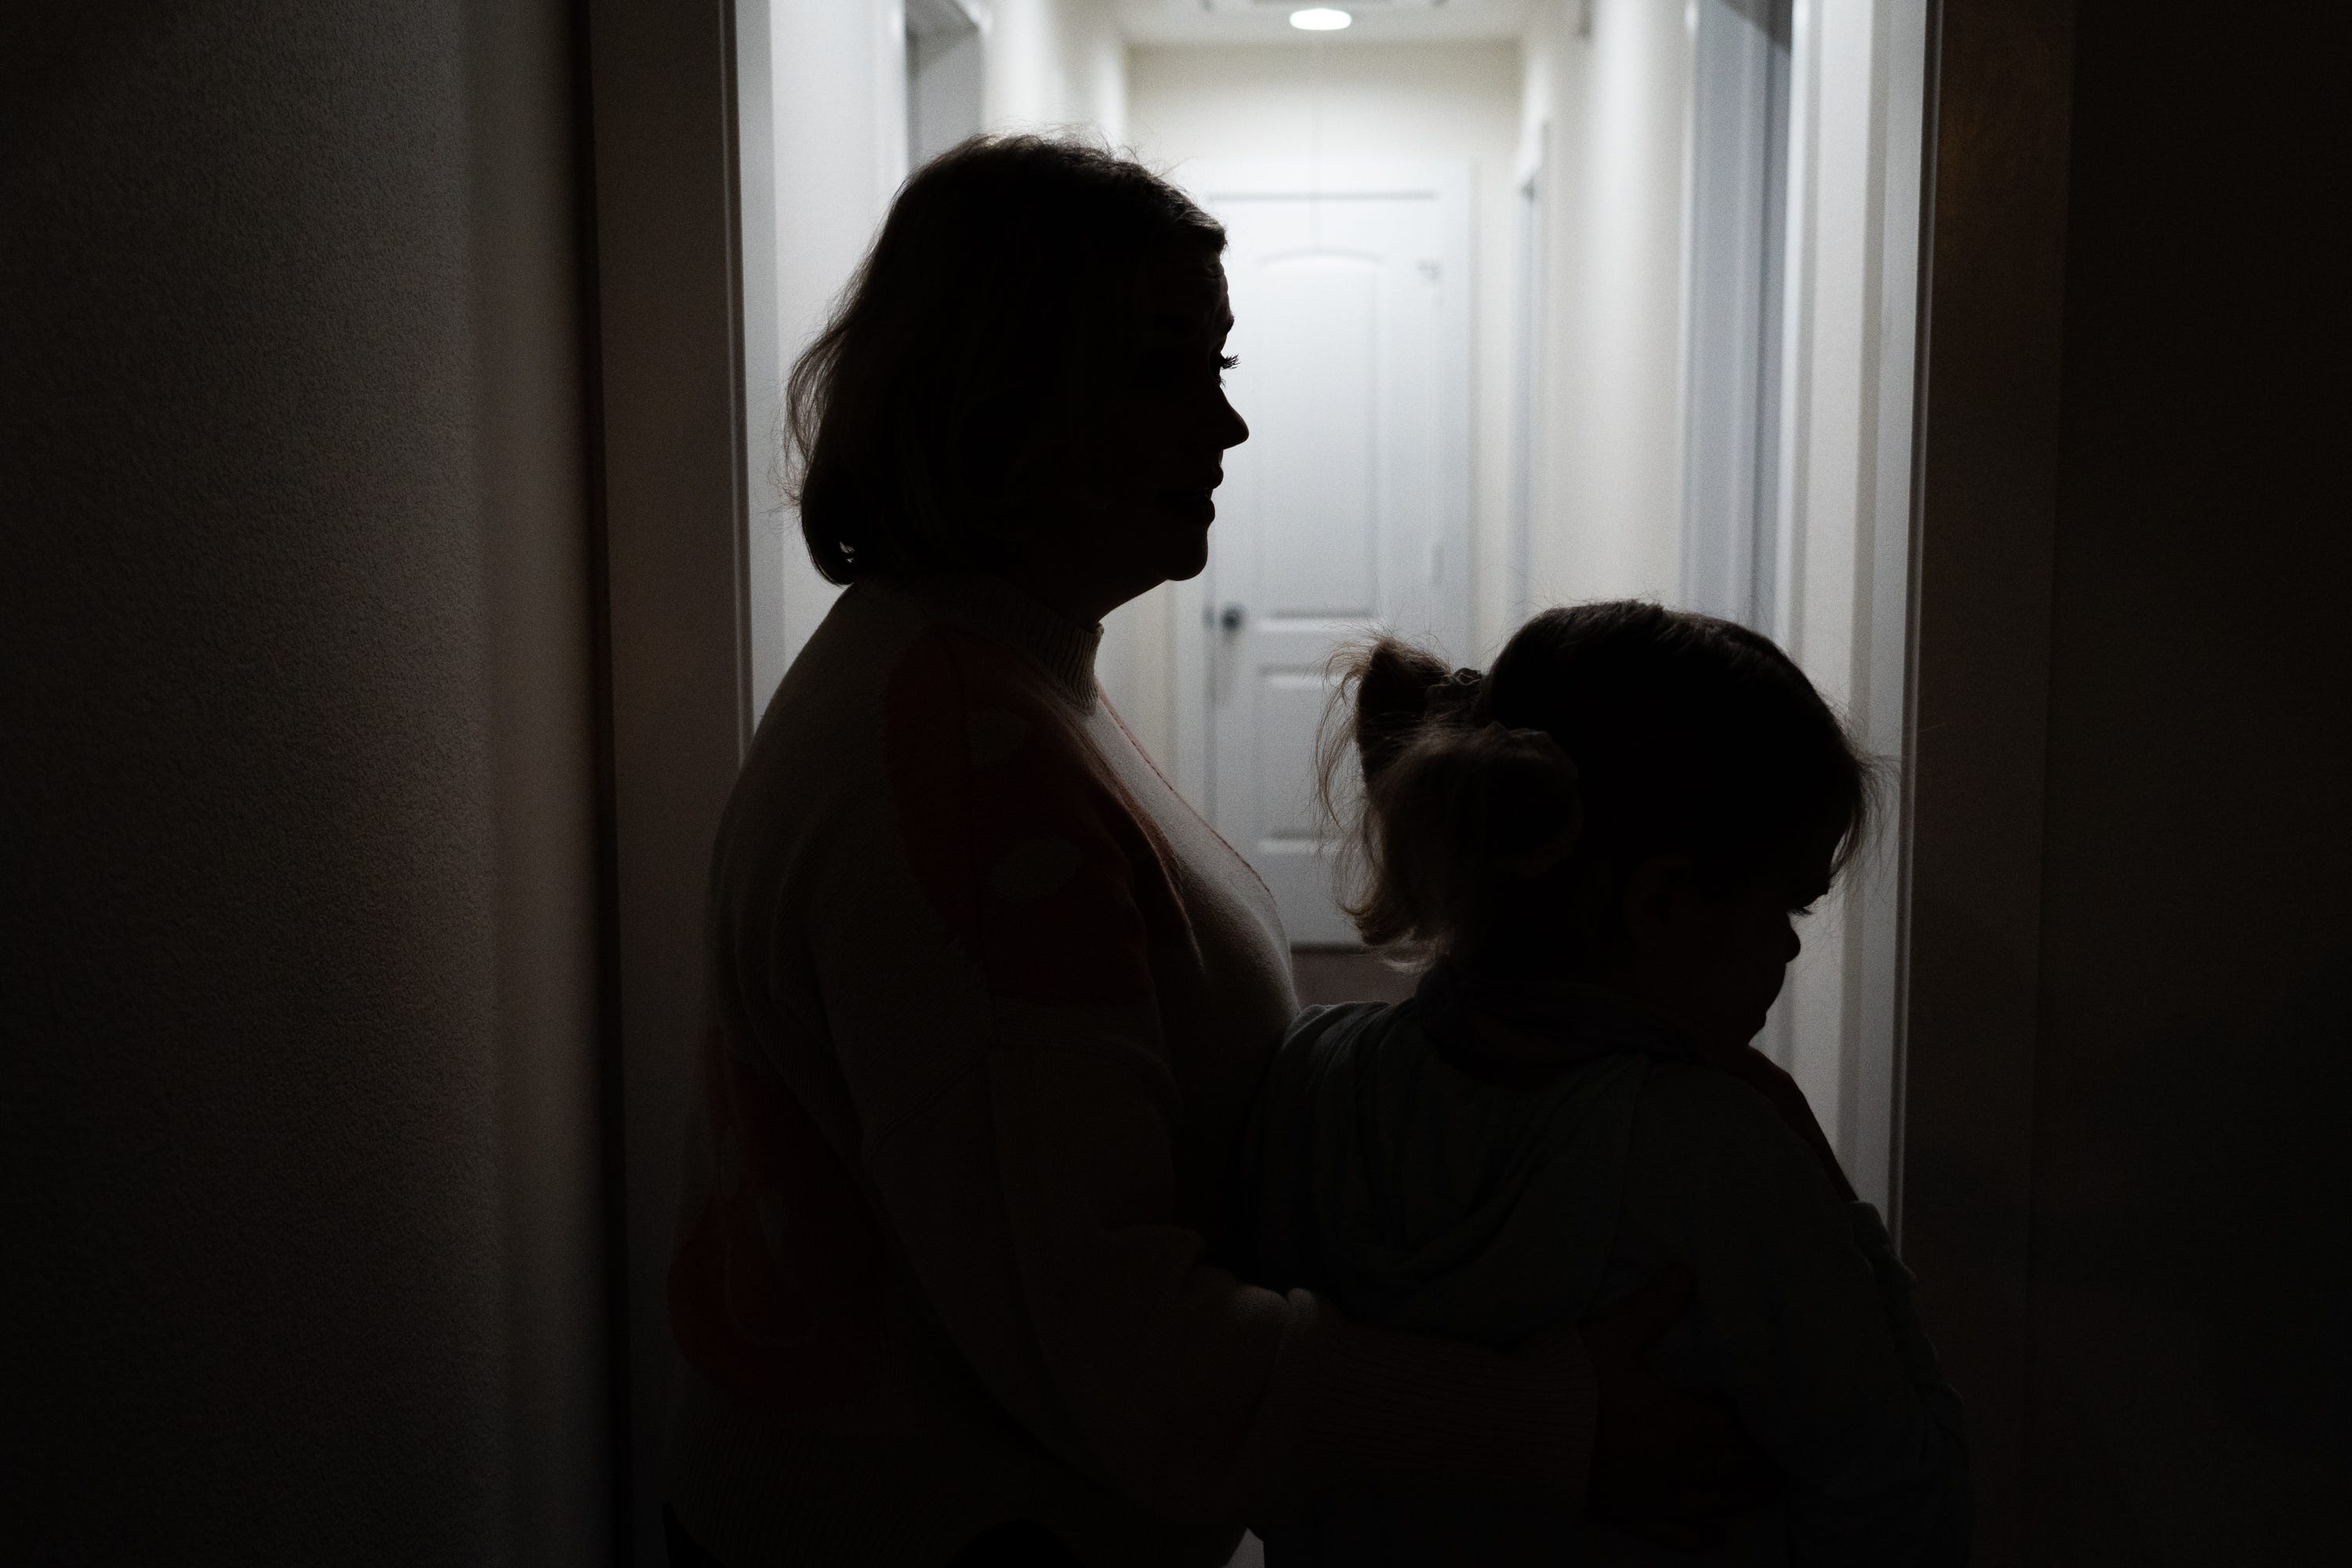 Shiloh Carter helps her daughter, Nola, down the hallway to the bathroom in their home in Friendswood, Texas.